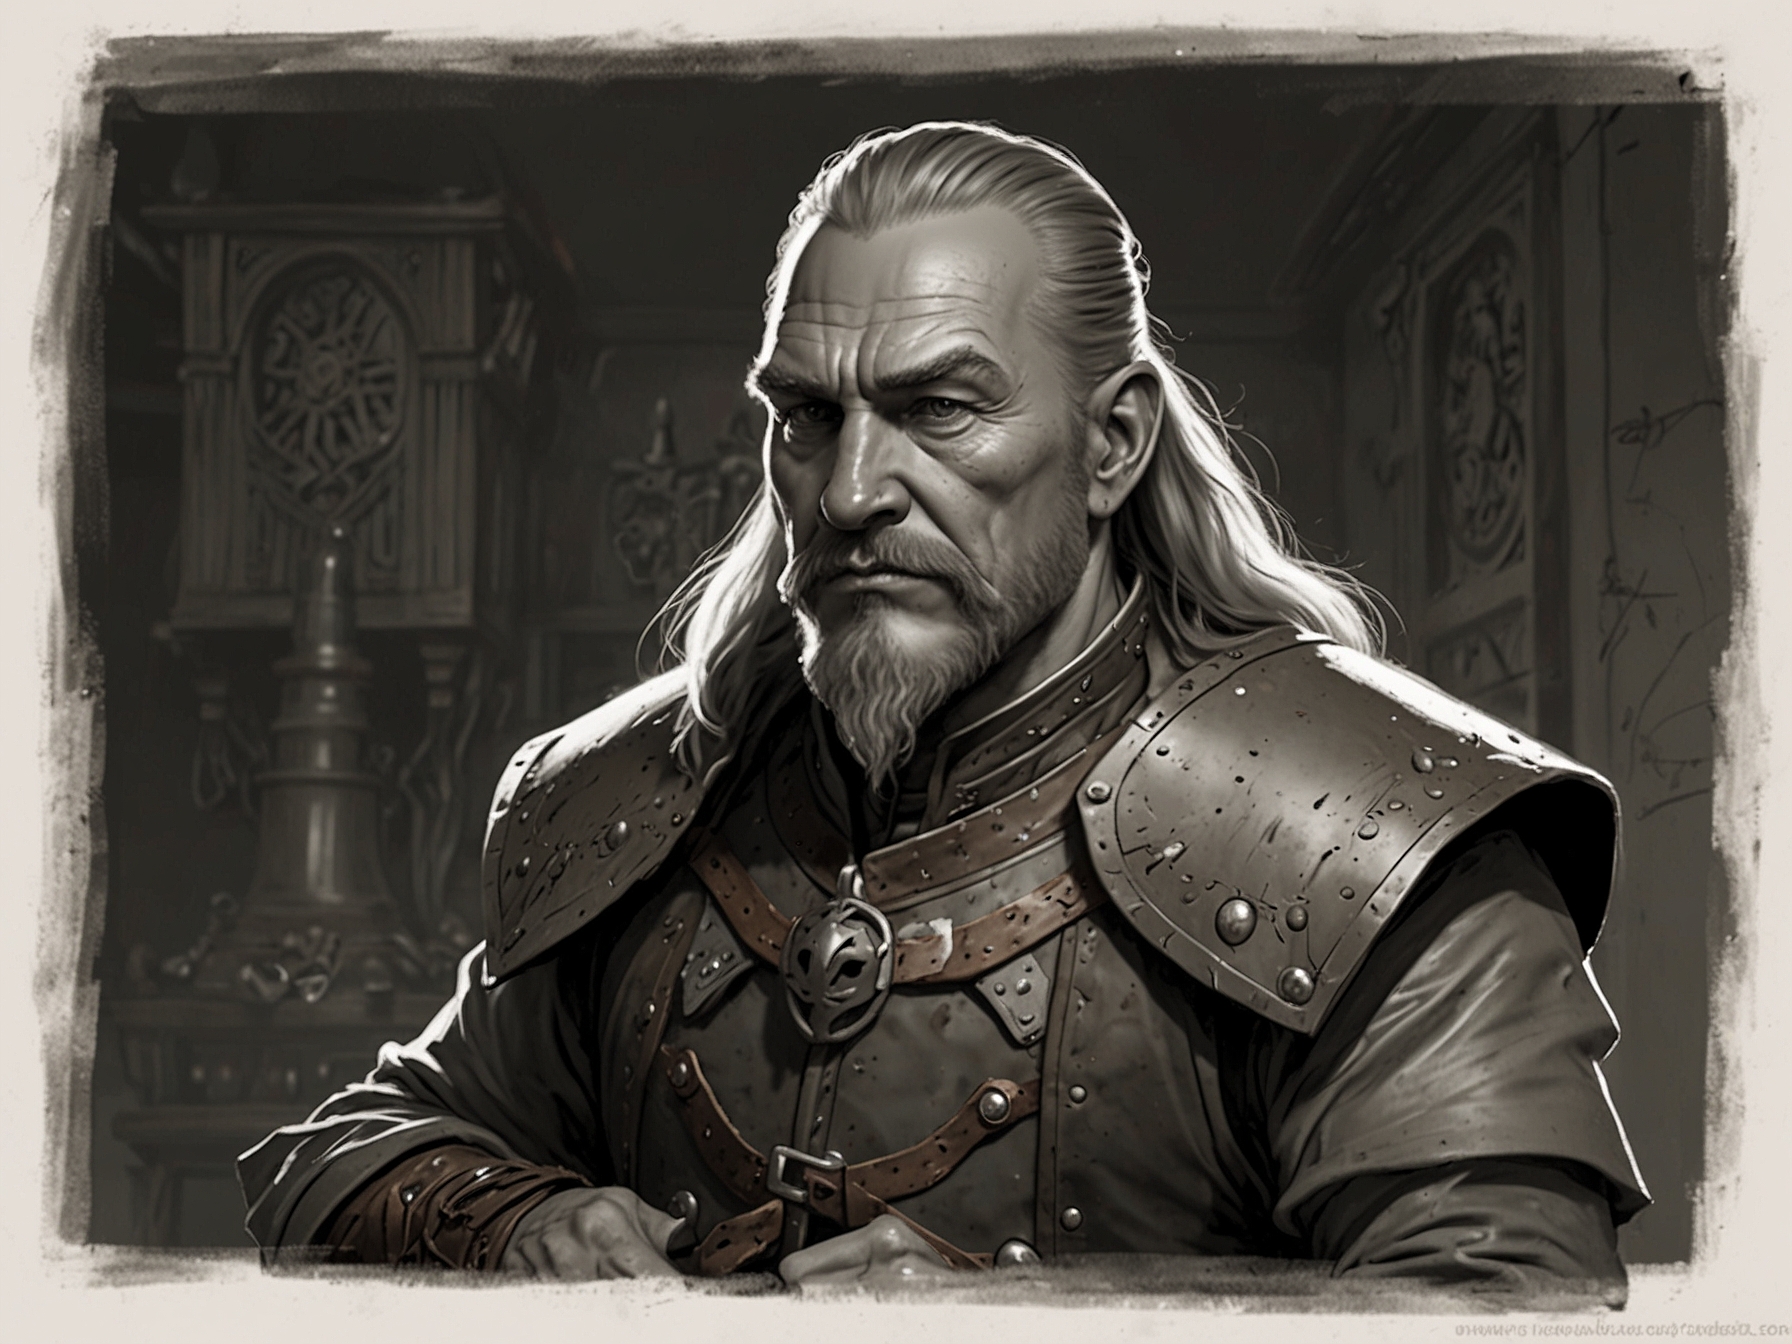 Ser Harwin Strong, also known as 'Breakbones,' is given considerable screen time in the season premiere, delving into his past and the heavy burden of living up to his formidable nickname.